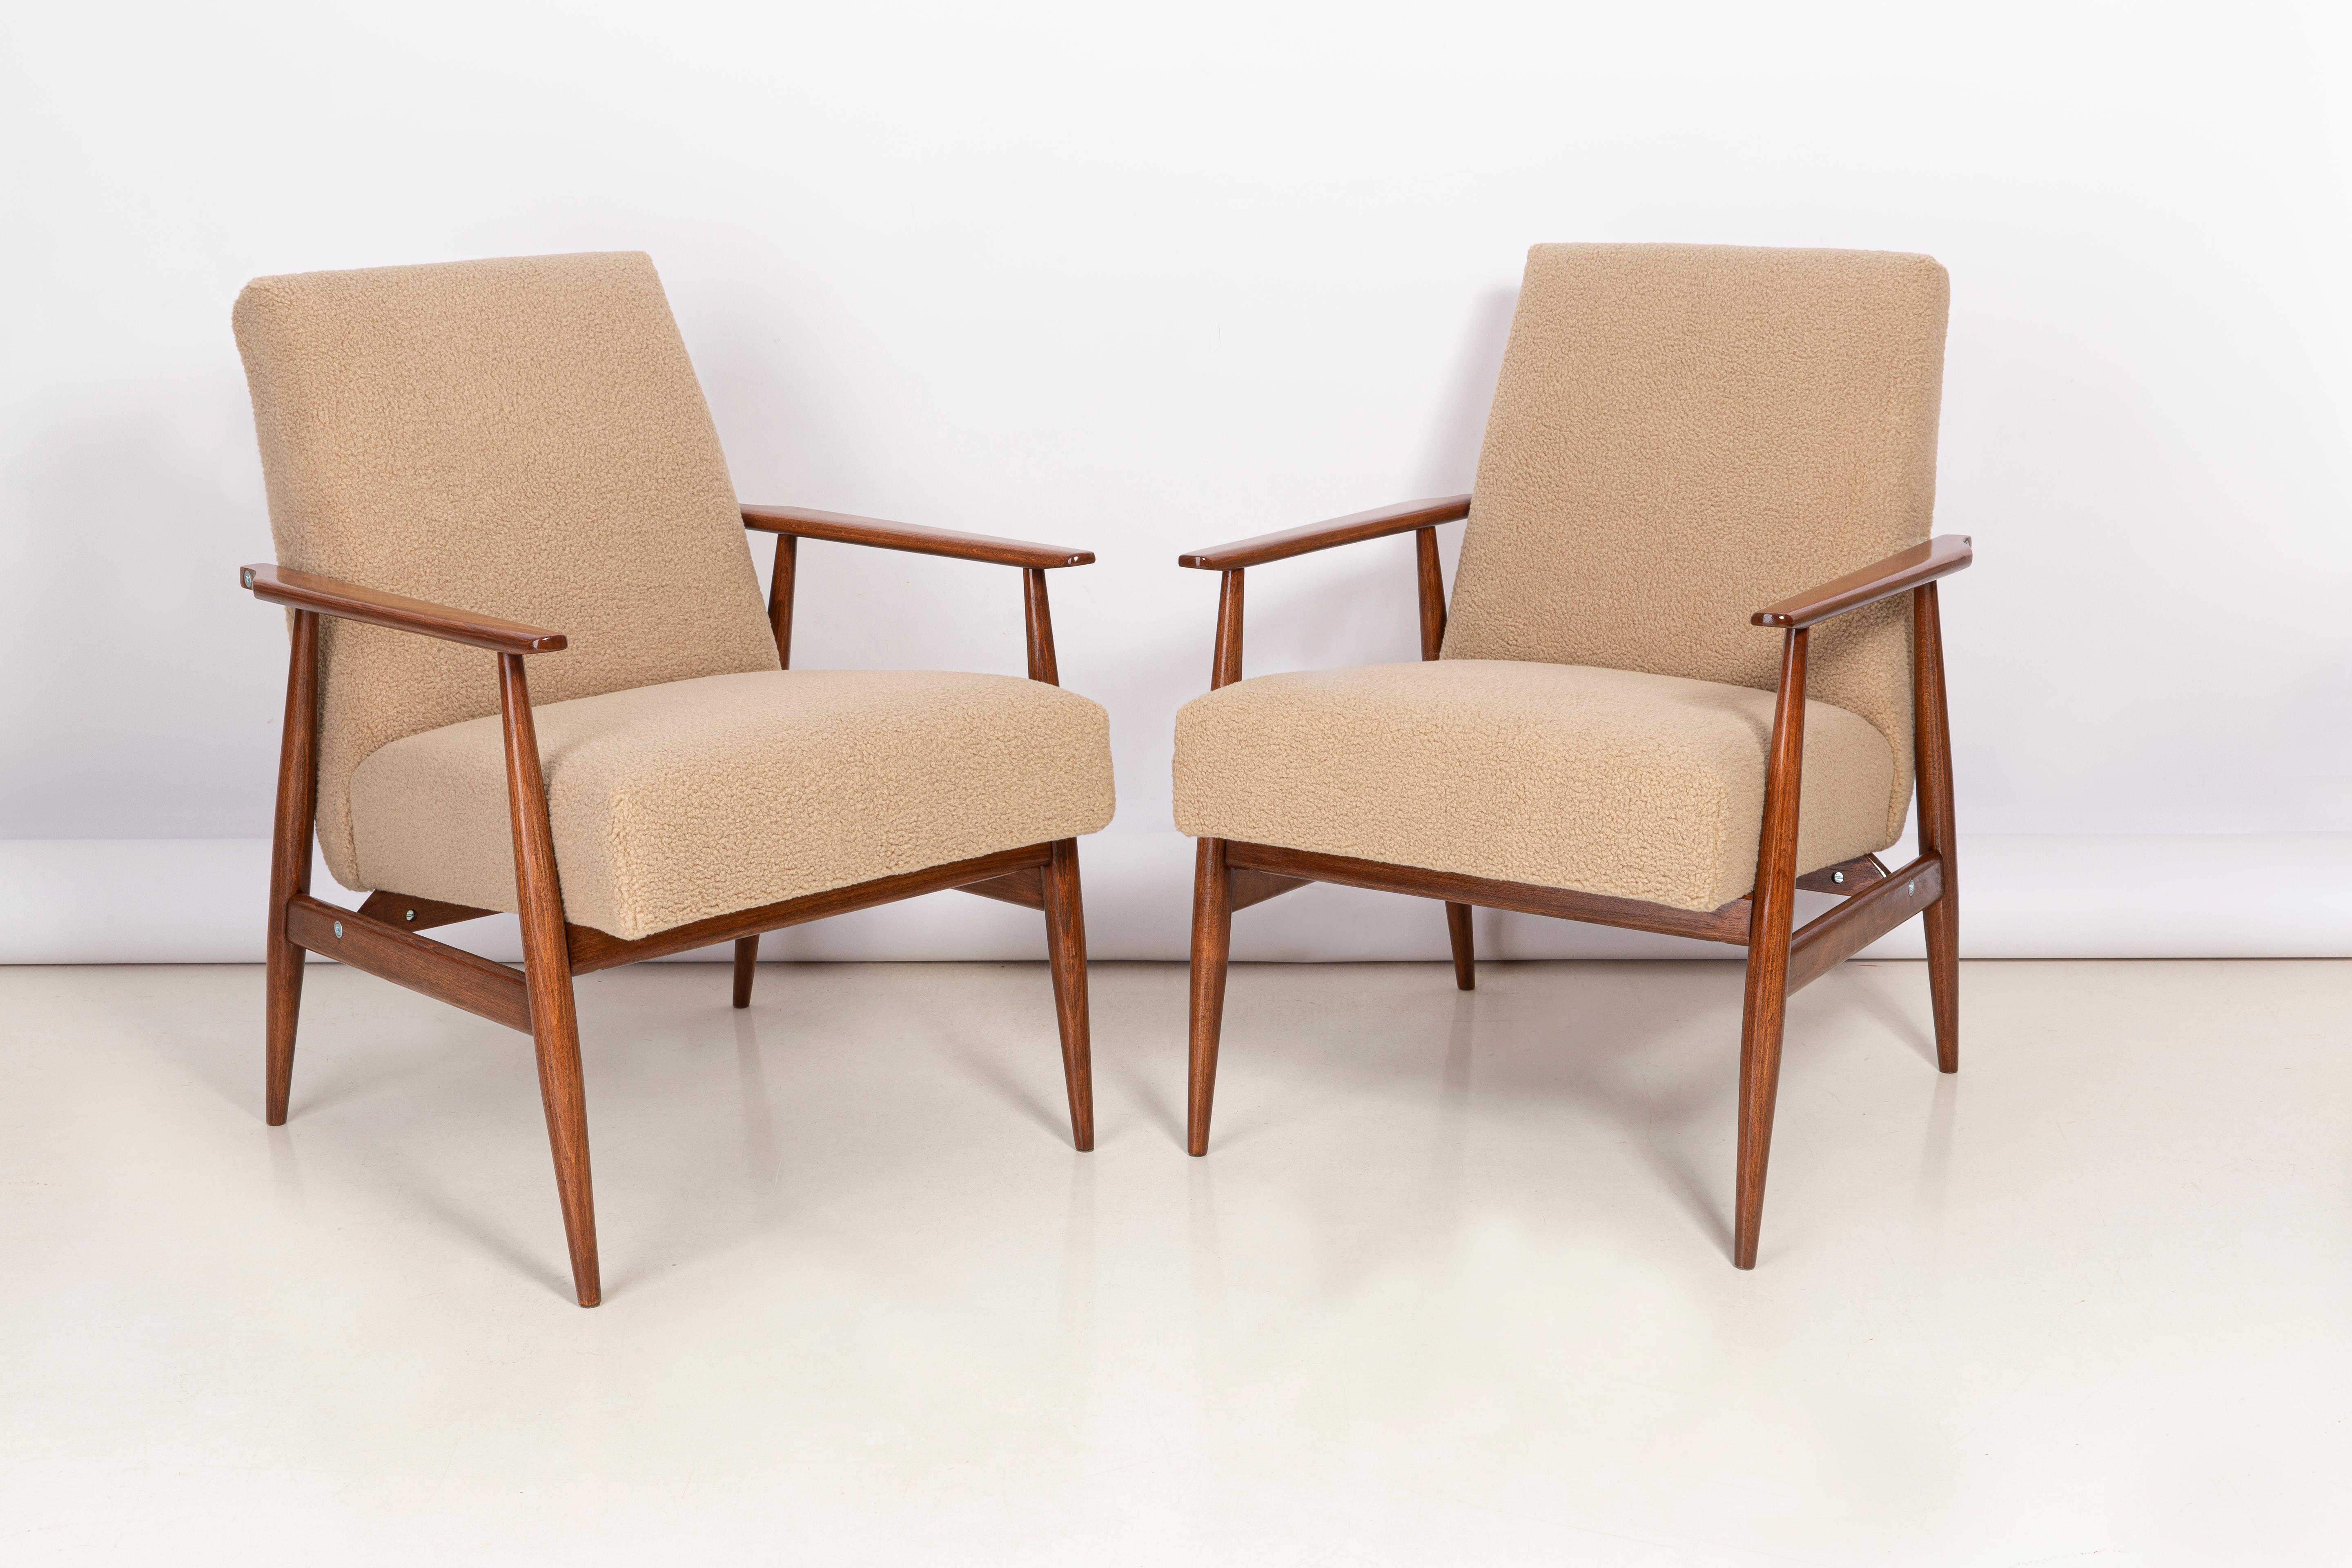 A pair of camel bouclé armchairs, designed by Henryk Lis. Furniture after full carpentry and upholstery renovation. The armchairs will be perfect in Minimalist spaces, both private and public. 

Upholstery - faux fur has a structure reminiscent of